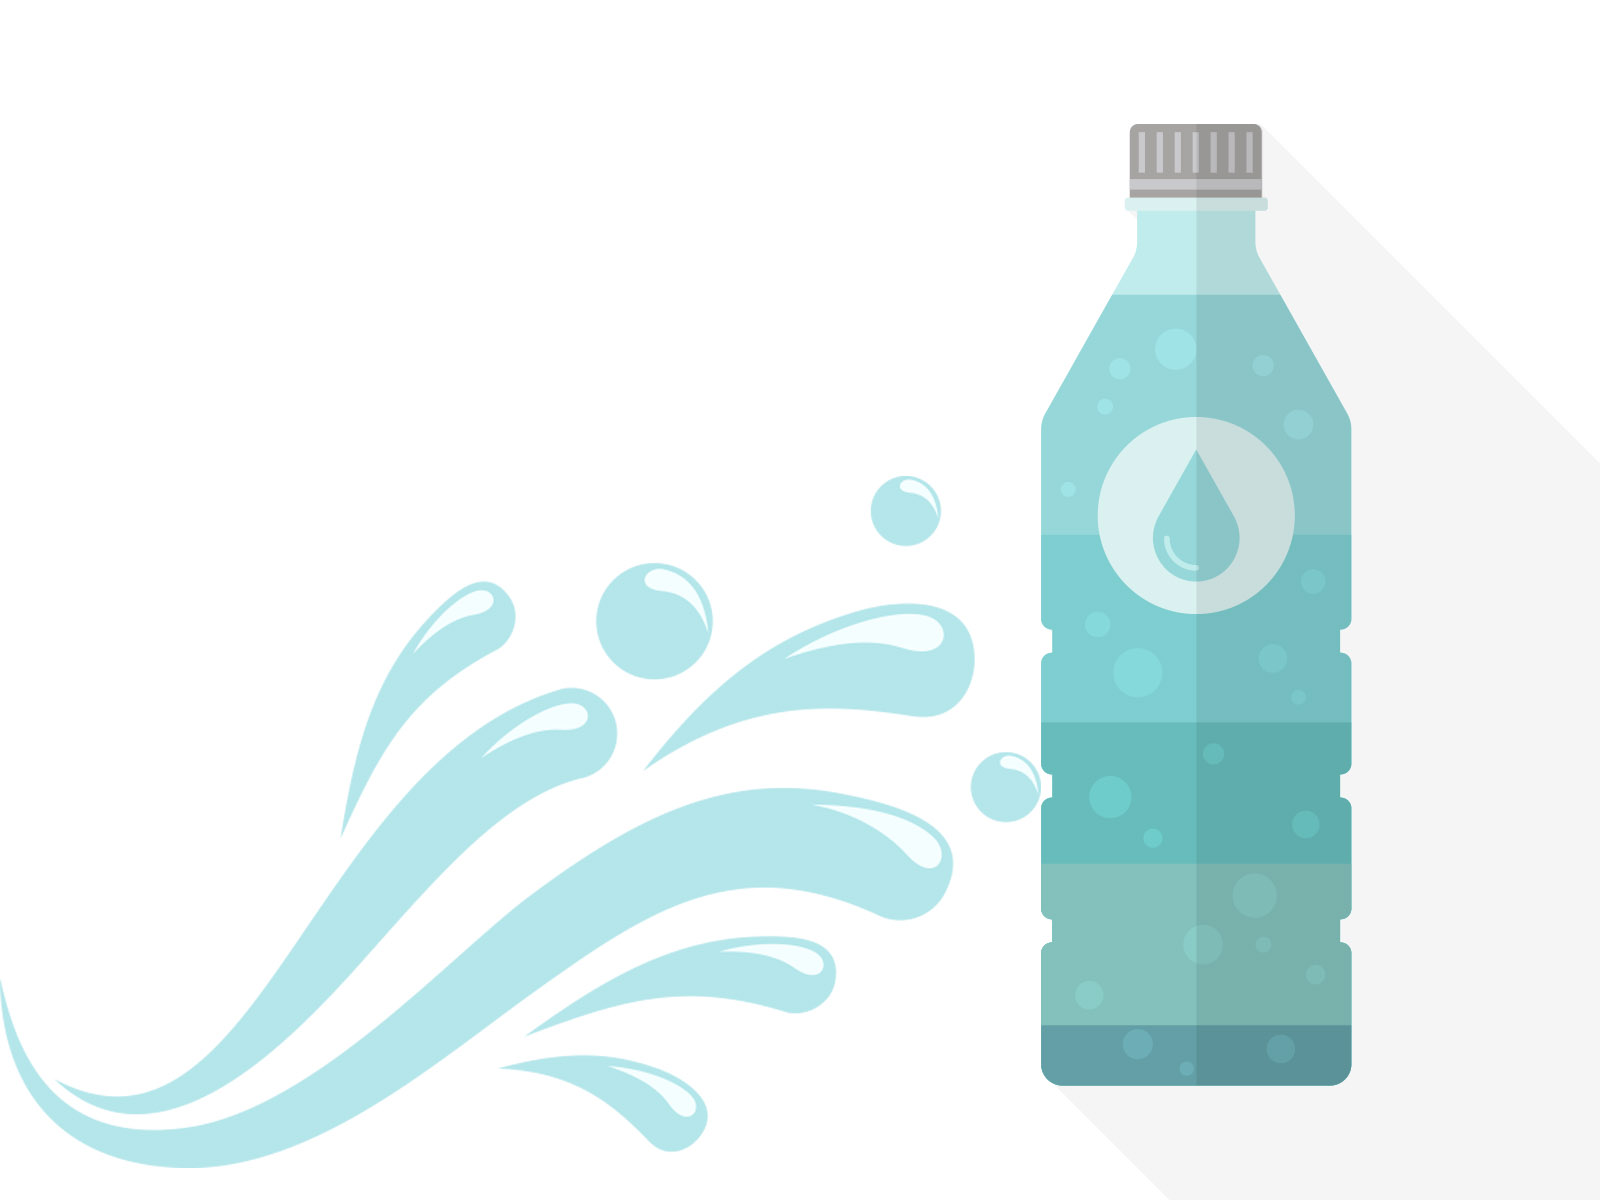 Water Bottles Powerpoint Templates - Food & Drink - Free PPT Backgrounds  and Templates